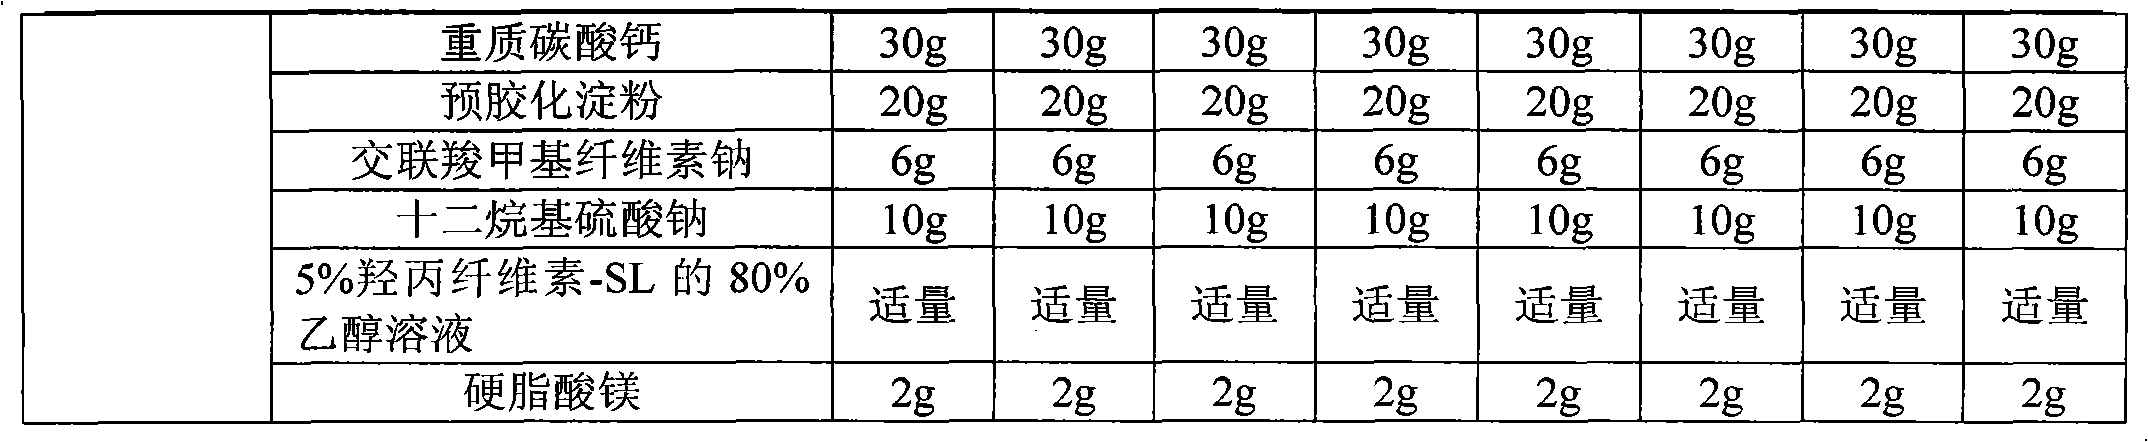 Composition capable of curing abnormal blood lipid